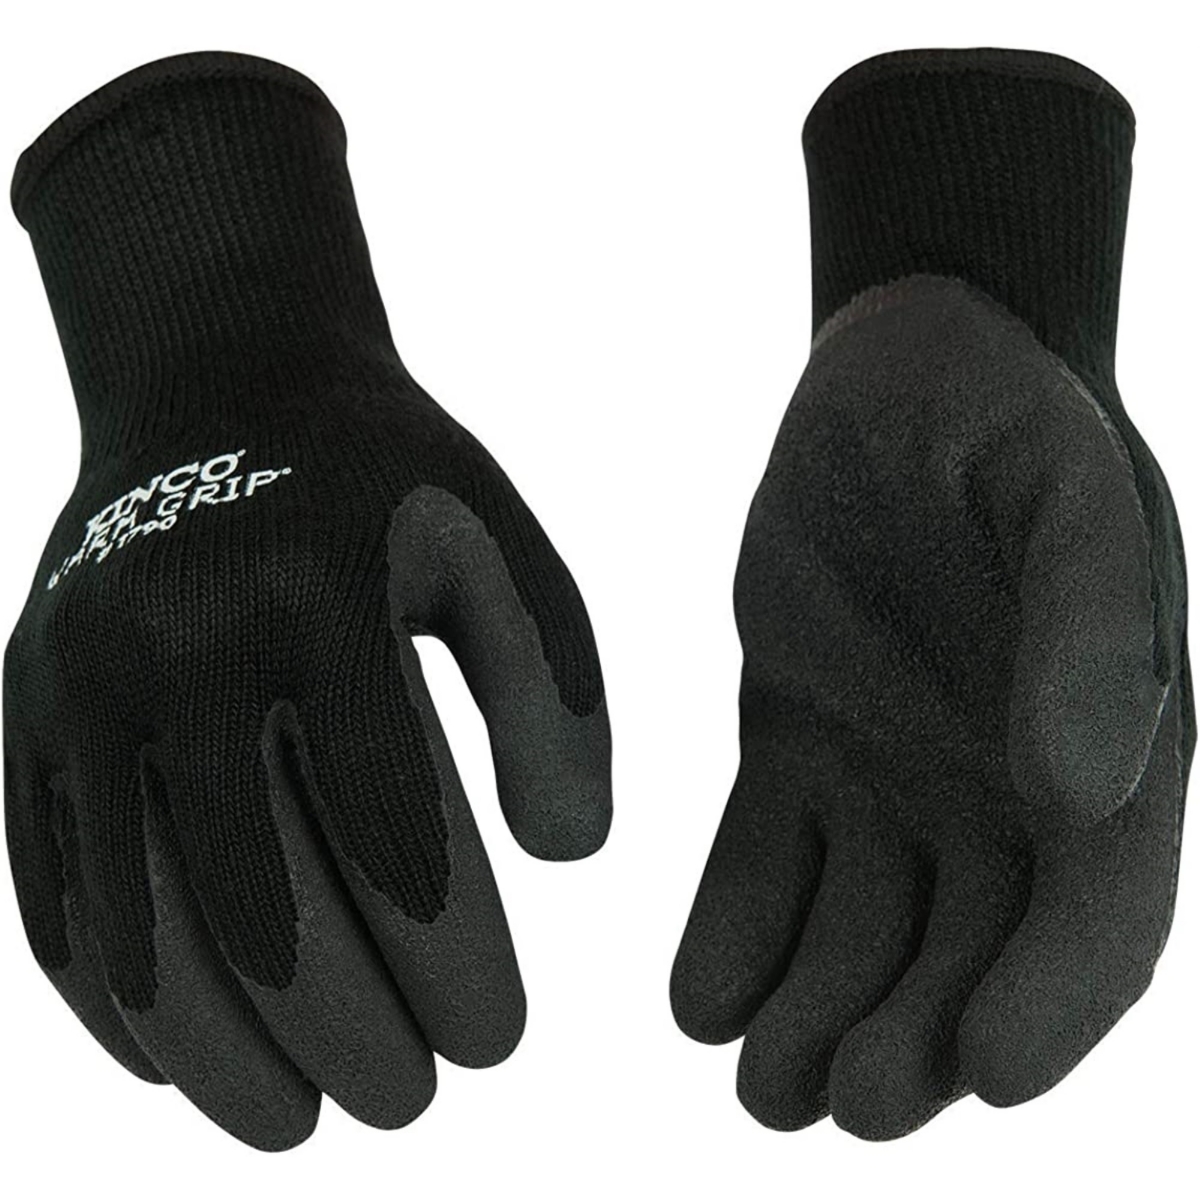 Kinco Warm Grip Thermal Knit Shell with Latex Palm, Black, Size Large - Black